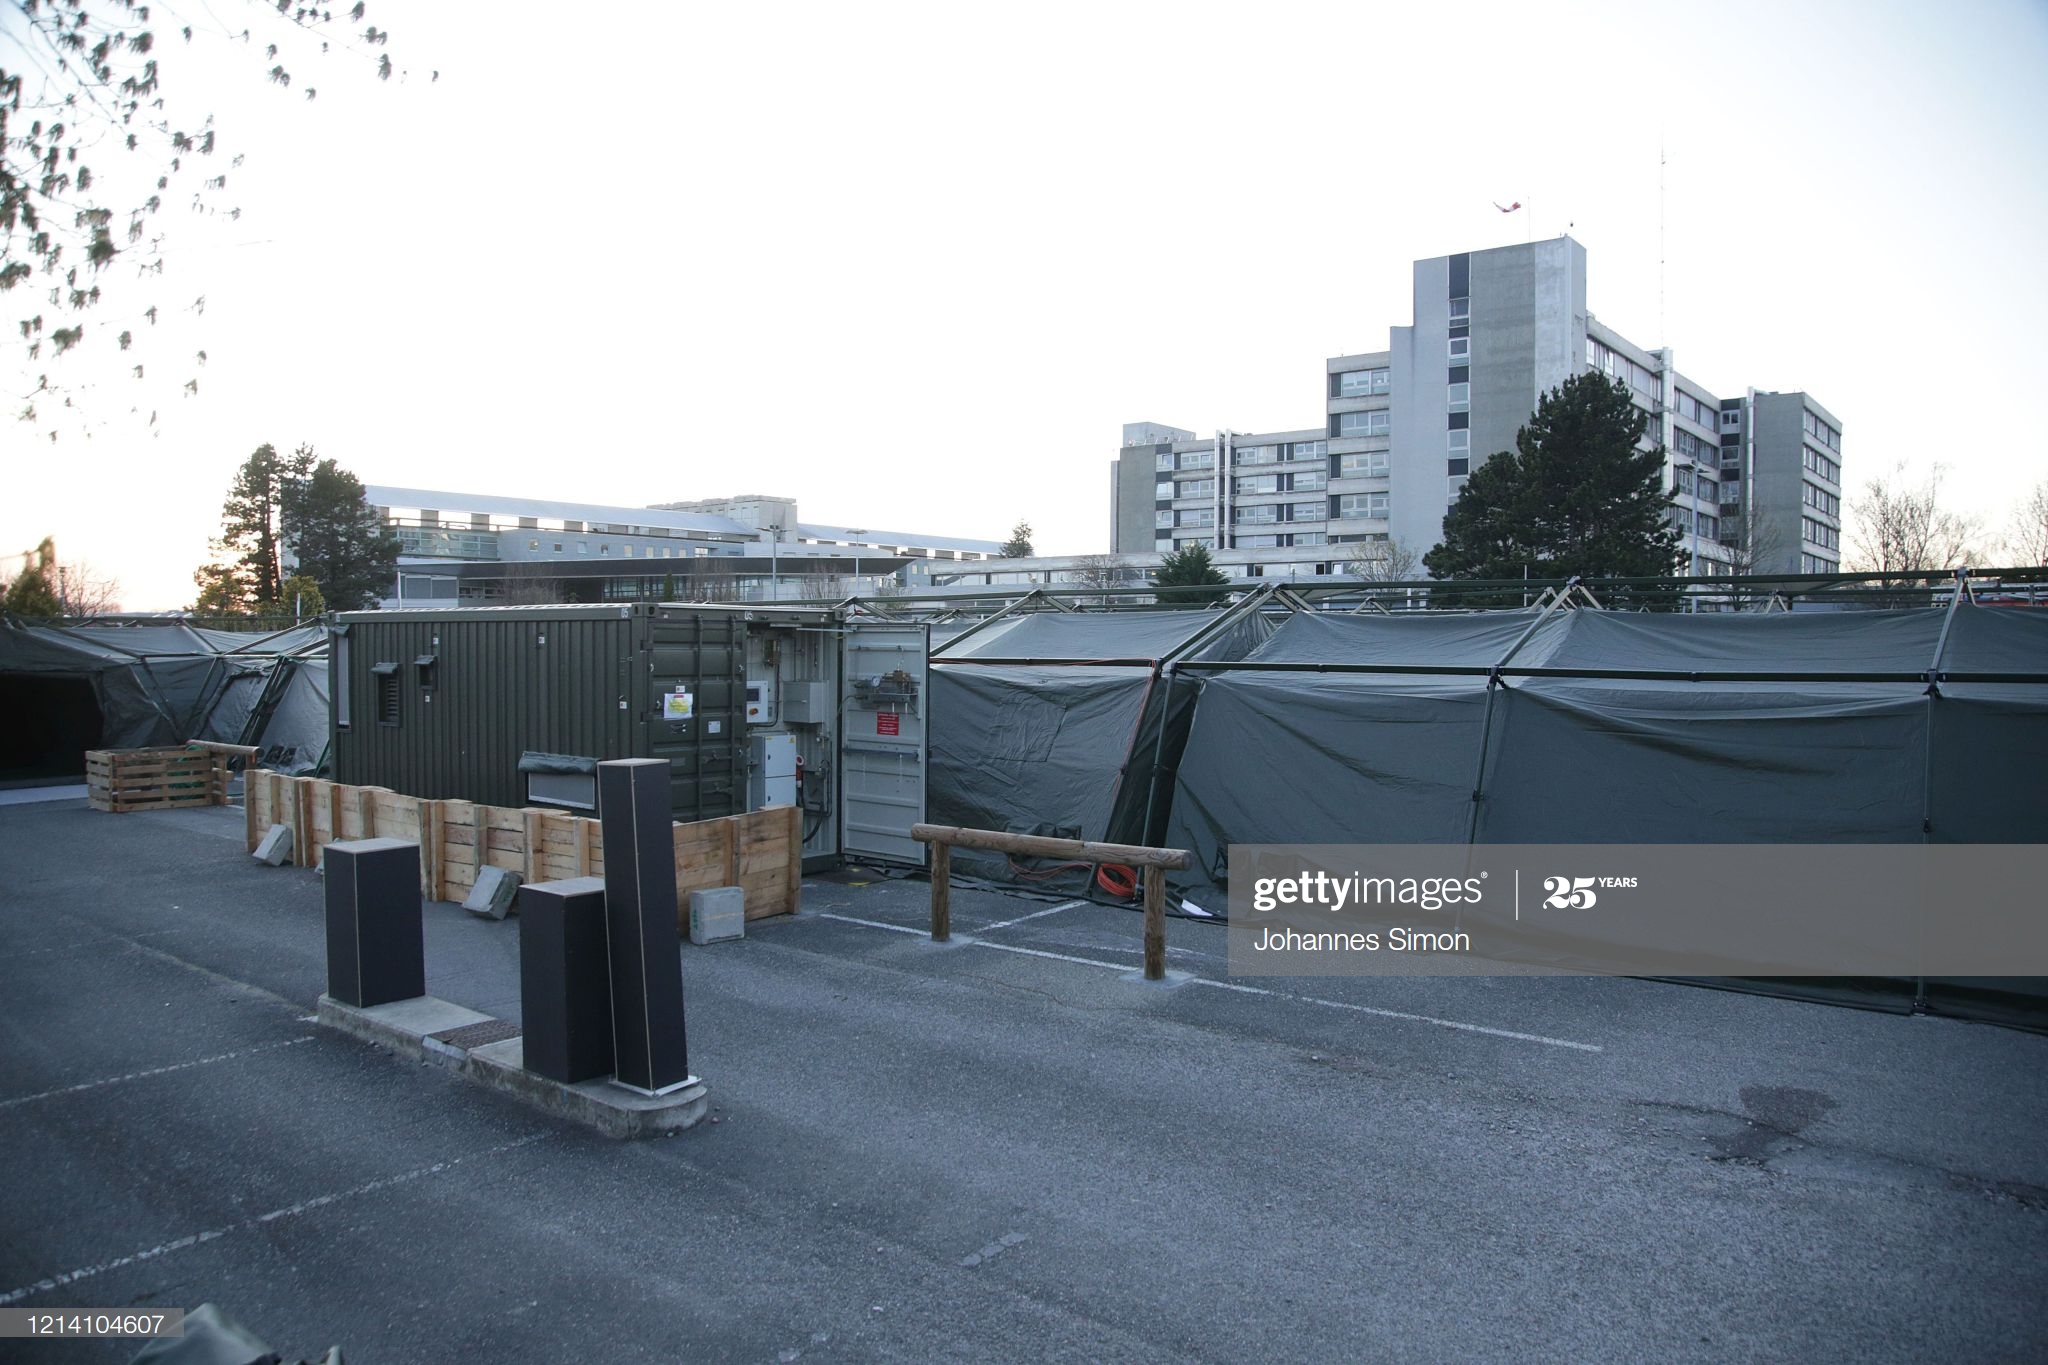 outside-view-of-a-field-hospital-in-front-of-emile-muller-hospital-picture-id1214104607